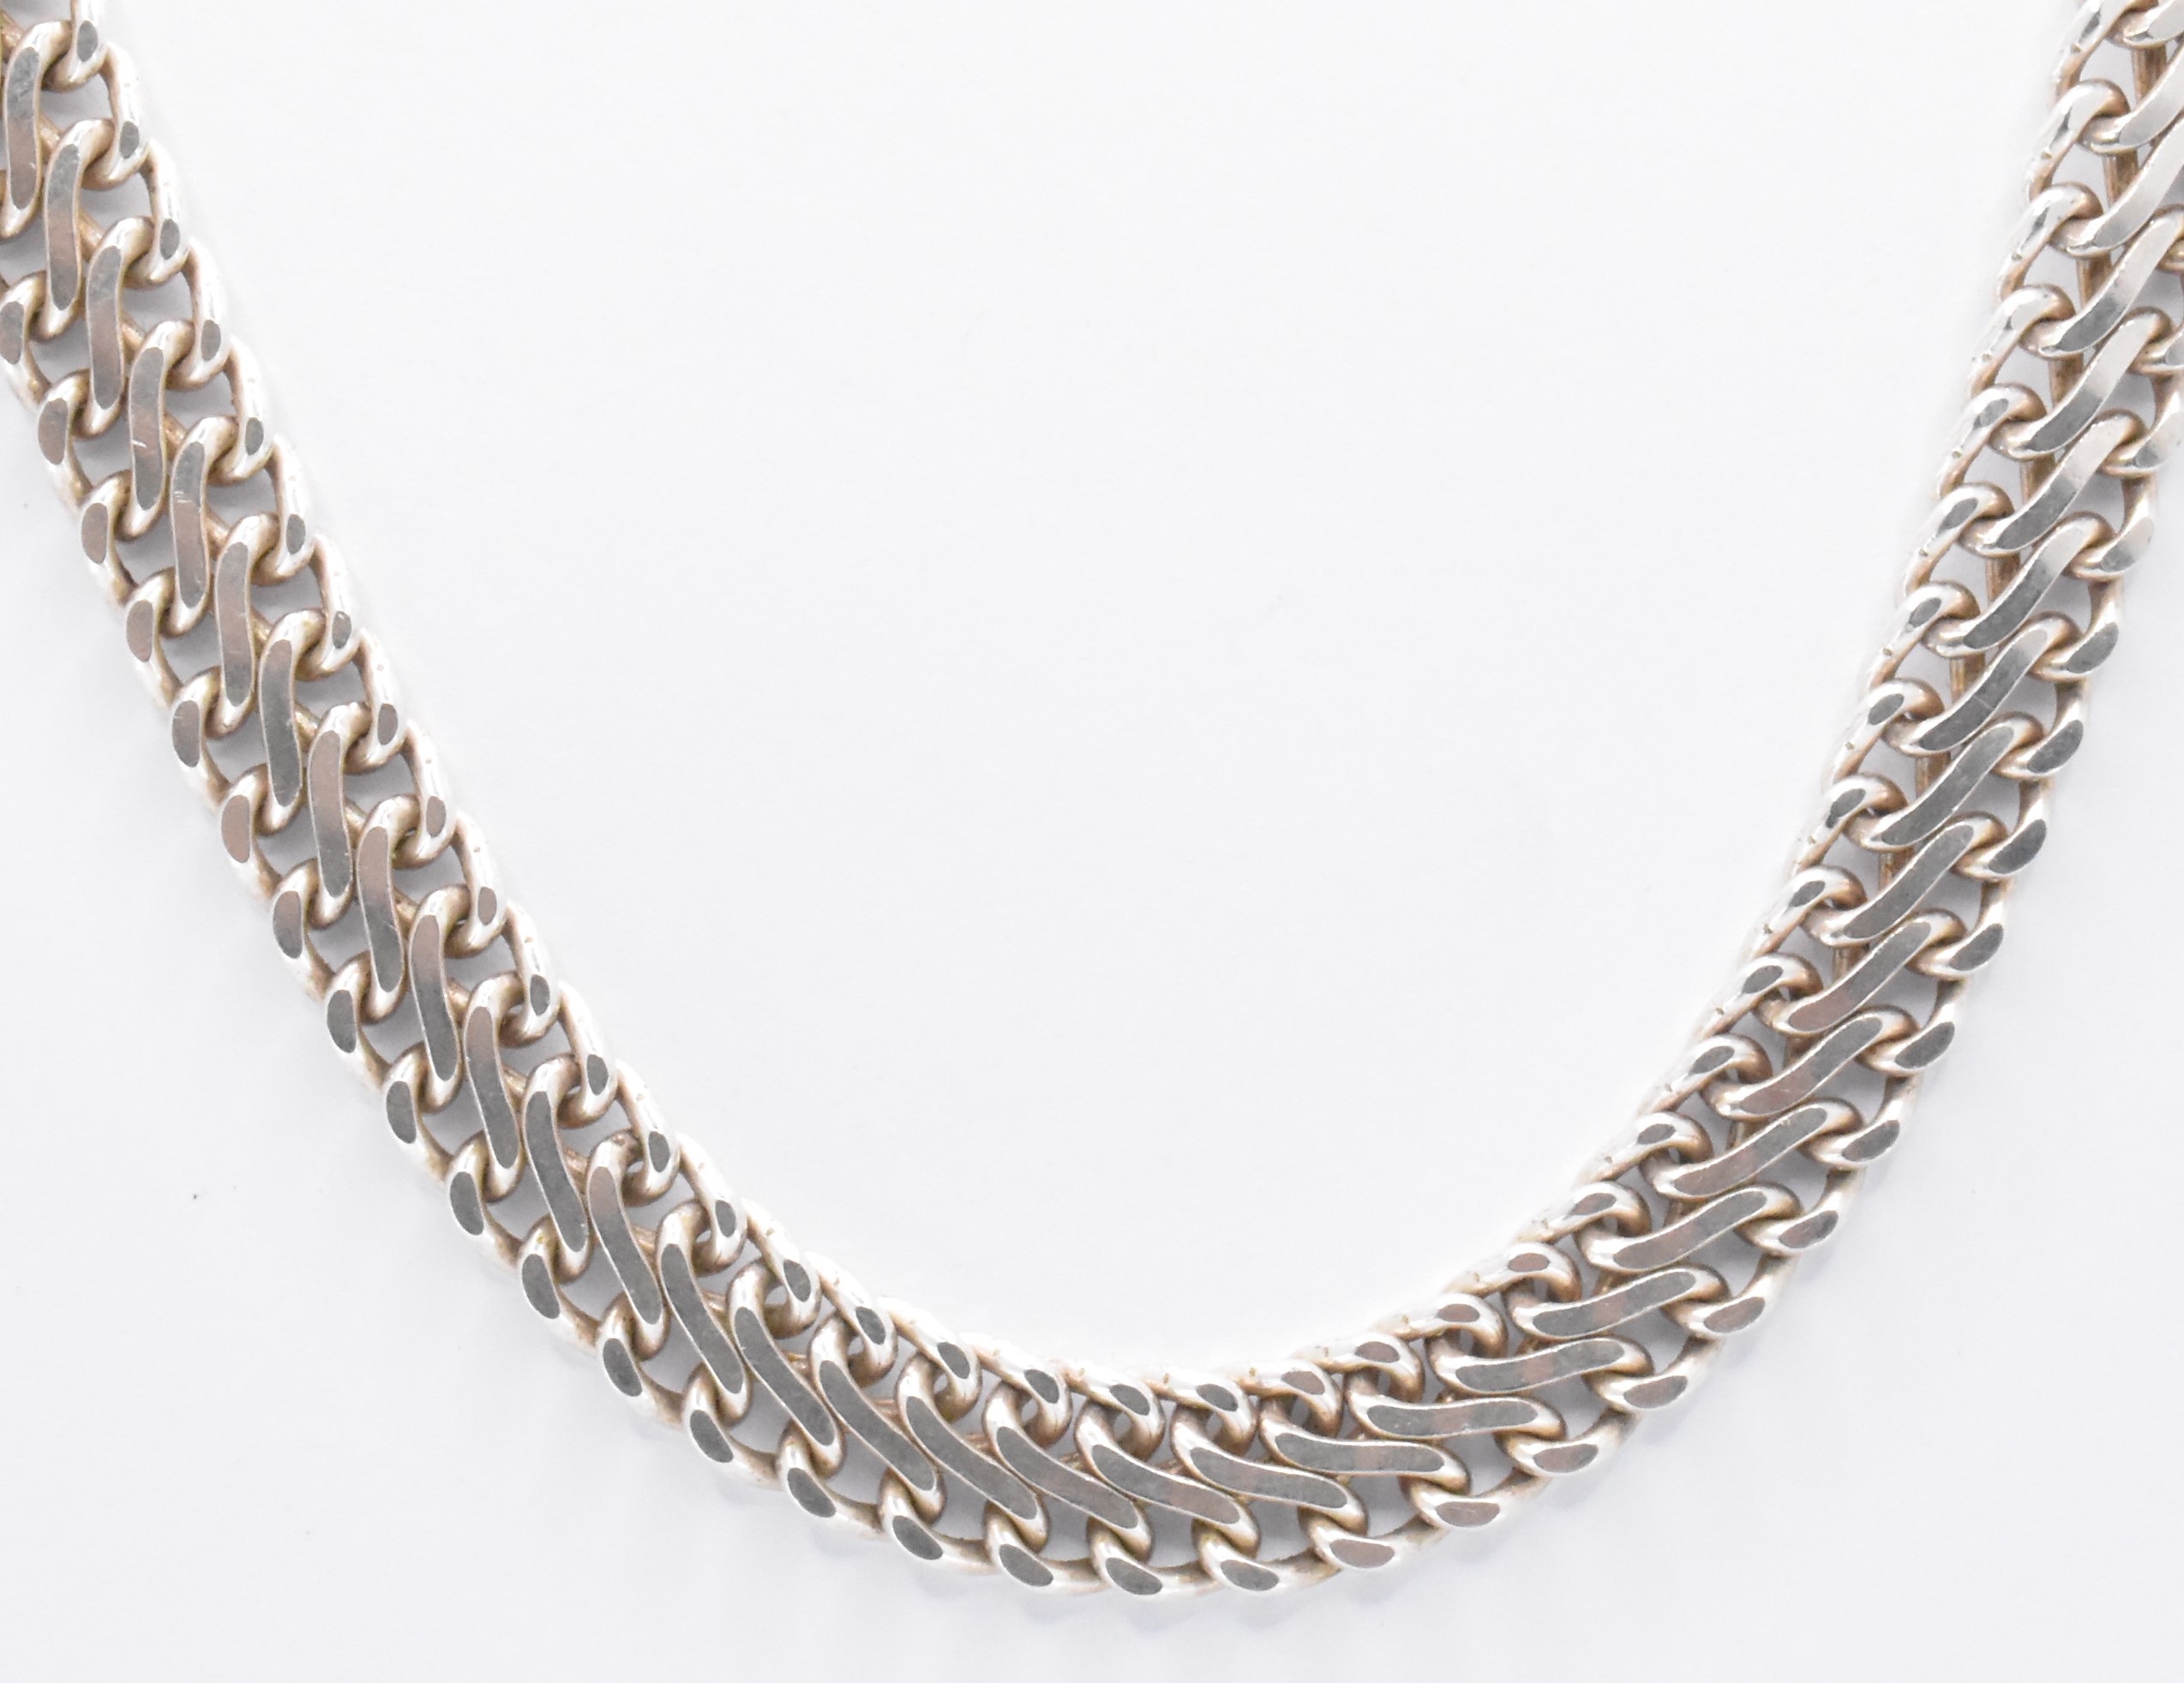 SILVER FANCY LINK NECKLACE CHAIN - Image 2 of 6